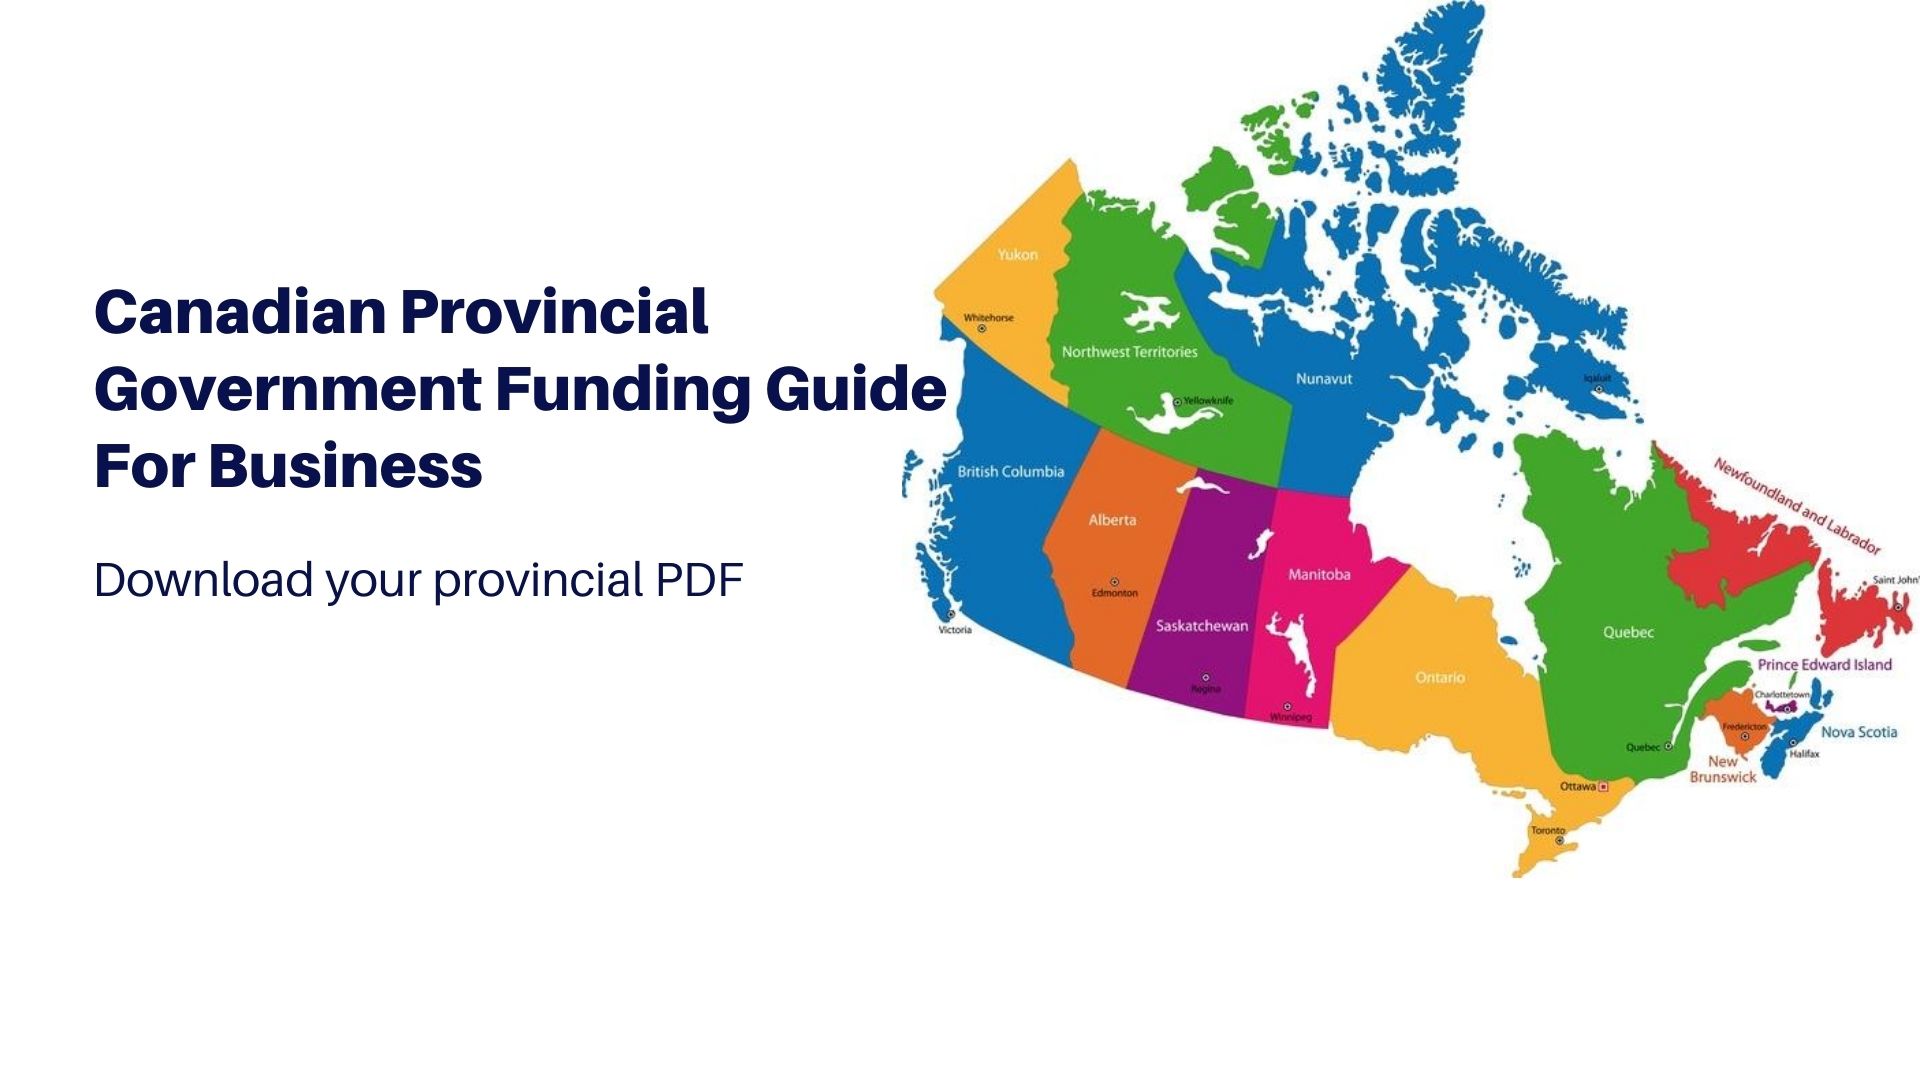 Canadian Provincial Government Funding Guide